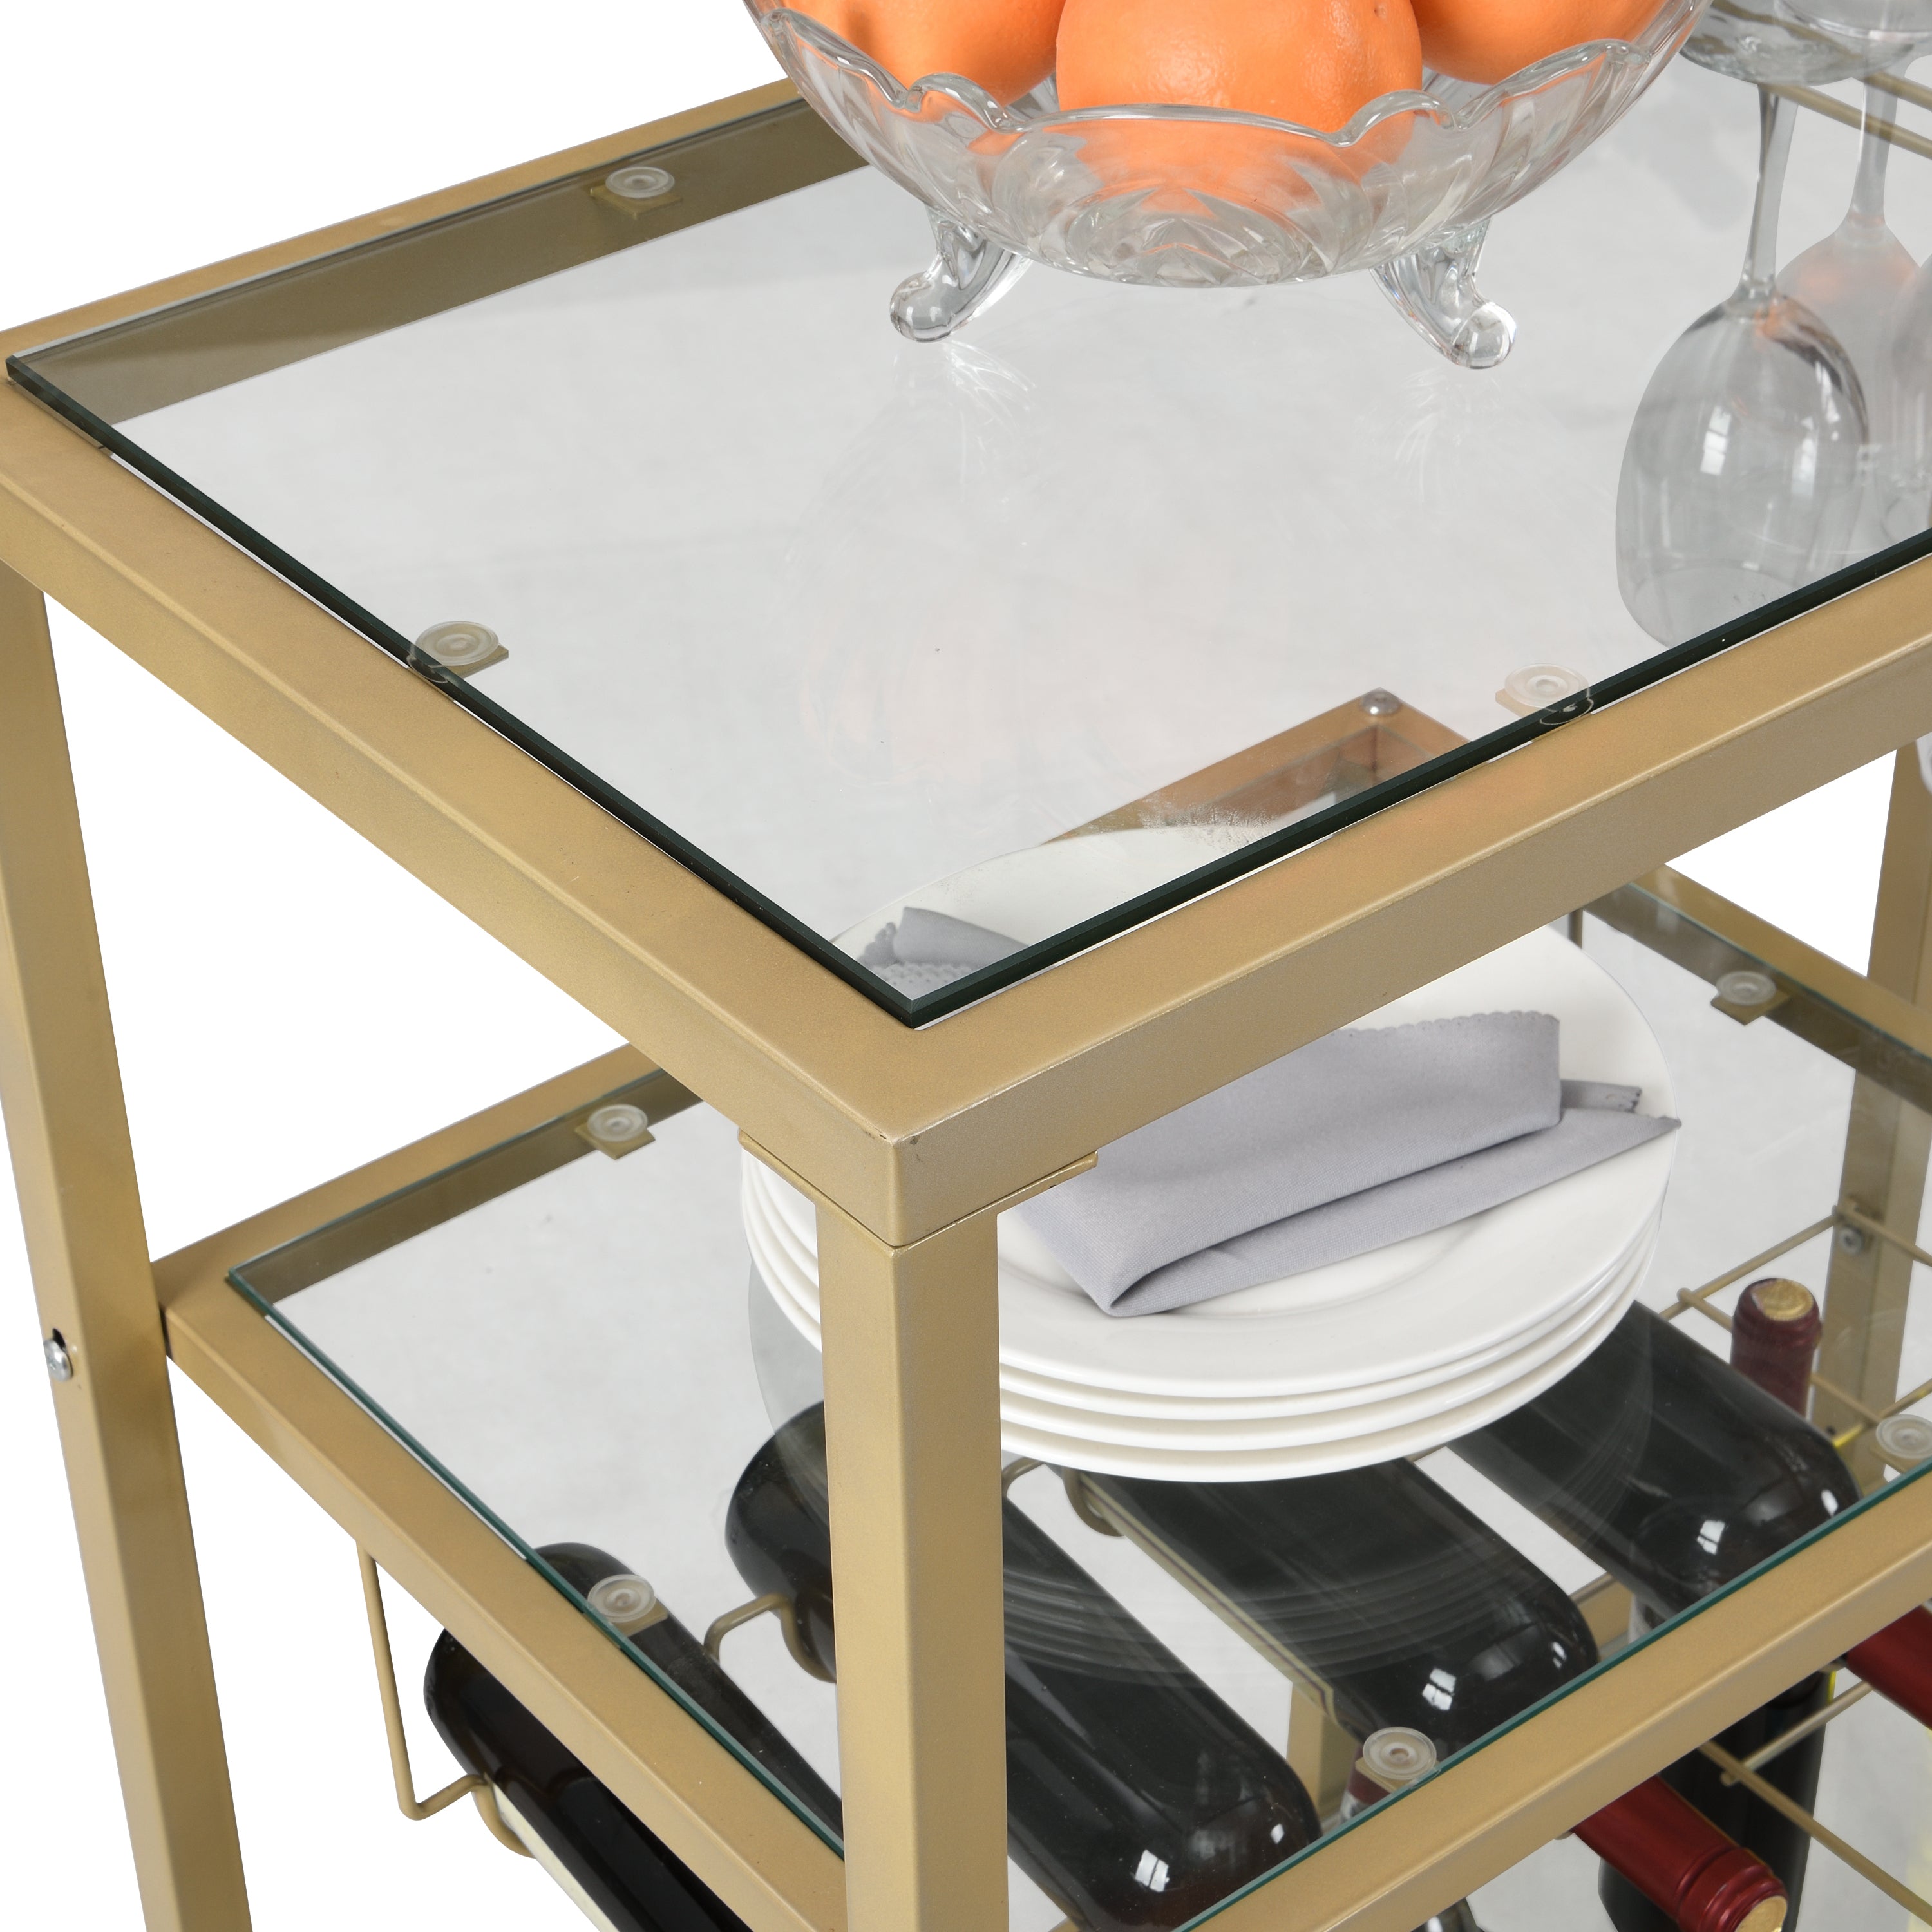 Golden Bar Food Cart with Wine Rack and Glass Rack